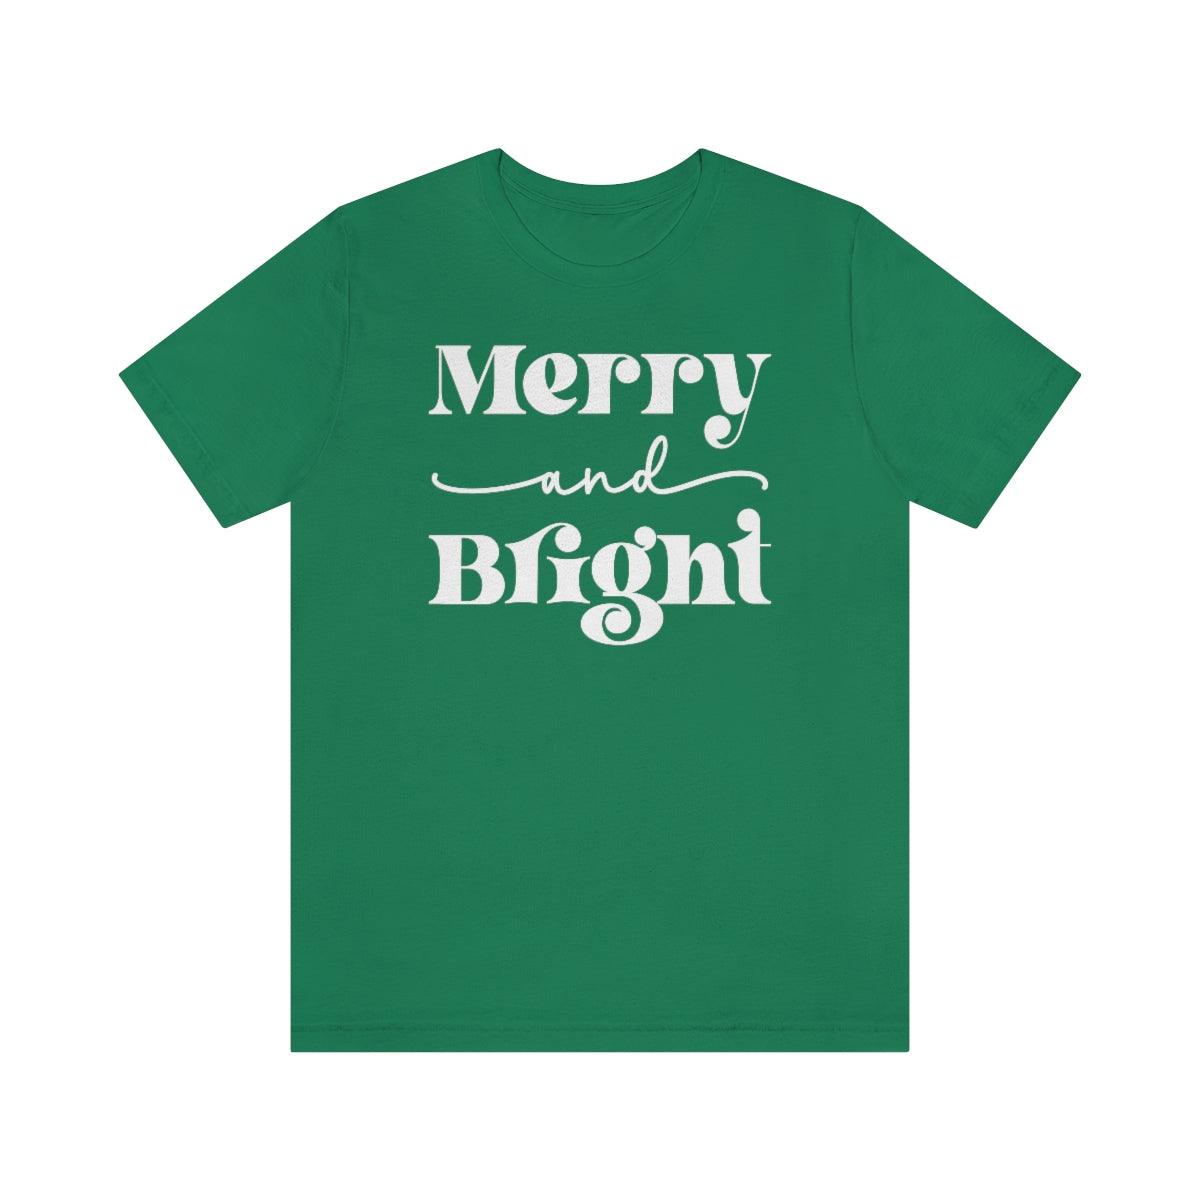 Retro Merry and Bright Christmas Shirt Short Sleeve Tee - Crystal Rose Design Co.